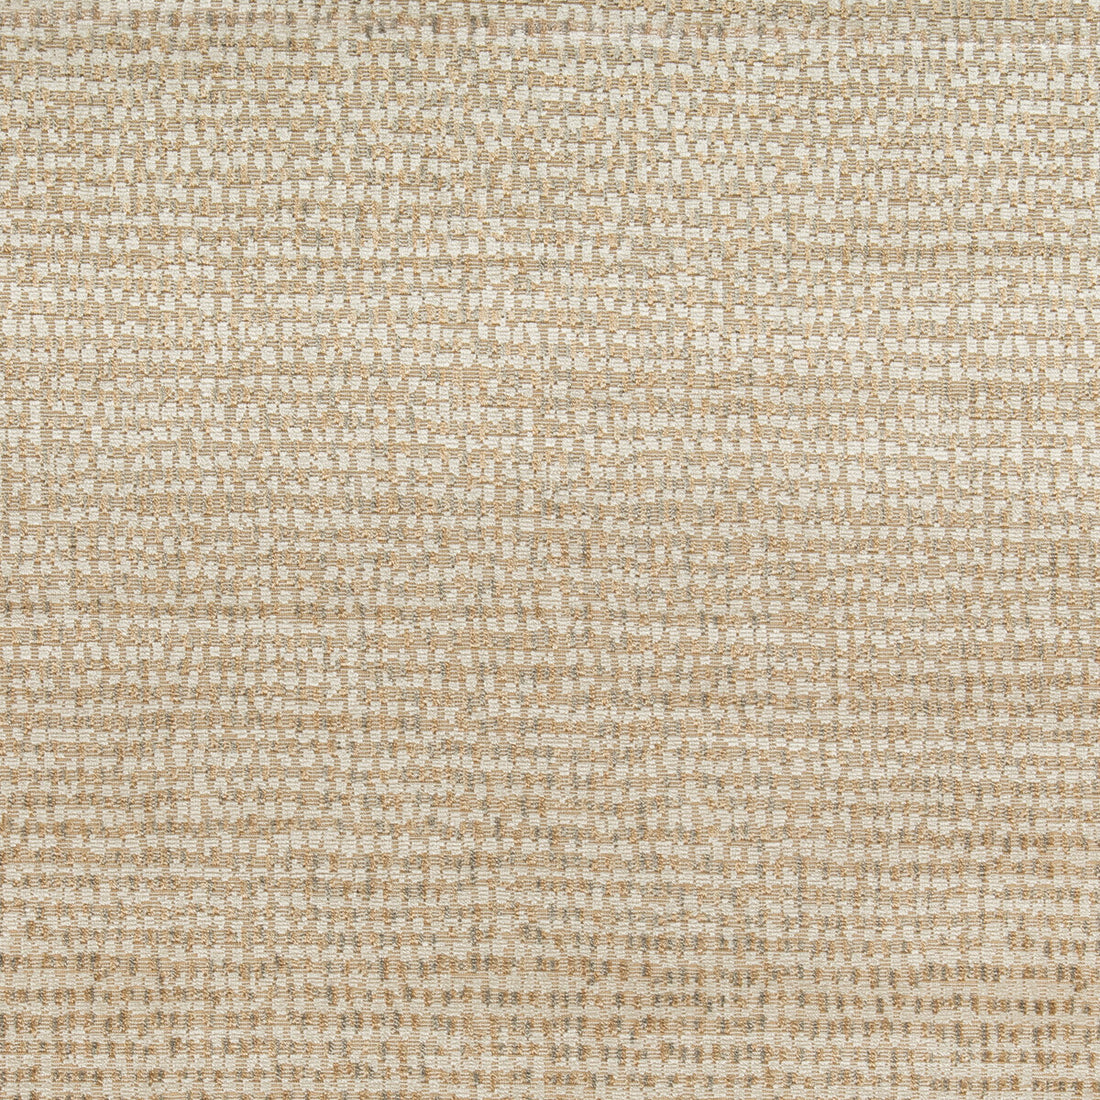 De Blois Velvet fabric in sand color - pattern 8020115.116.0 - by Brunschwig &amp; Fils in the Chaumont Velvets collection